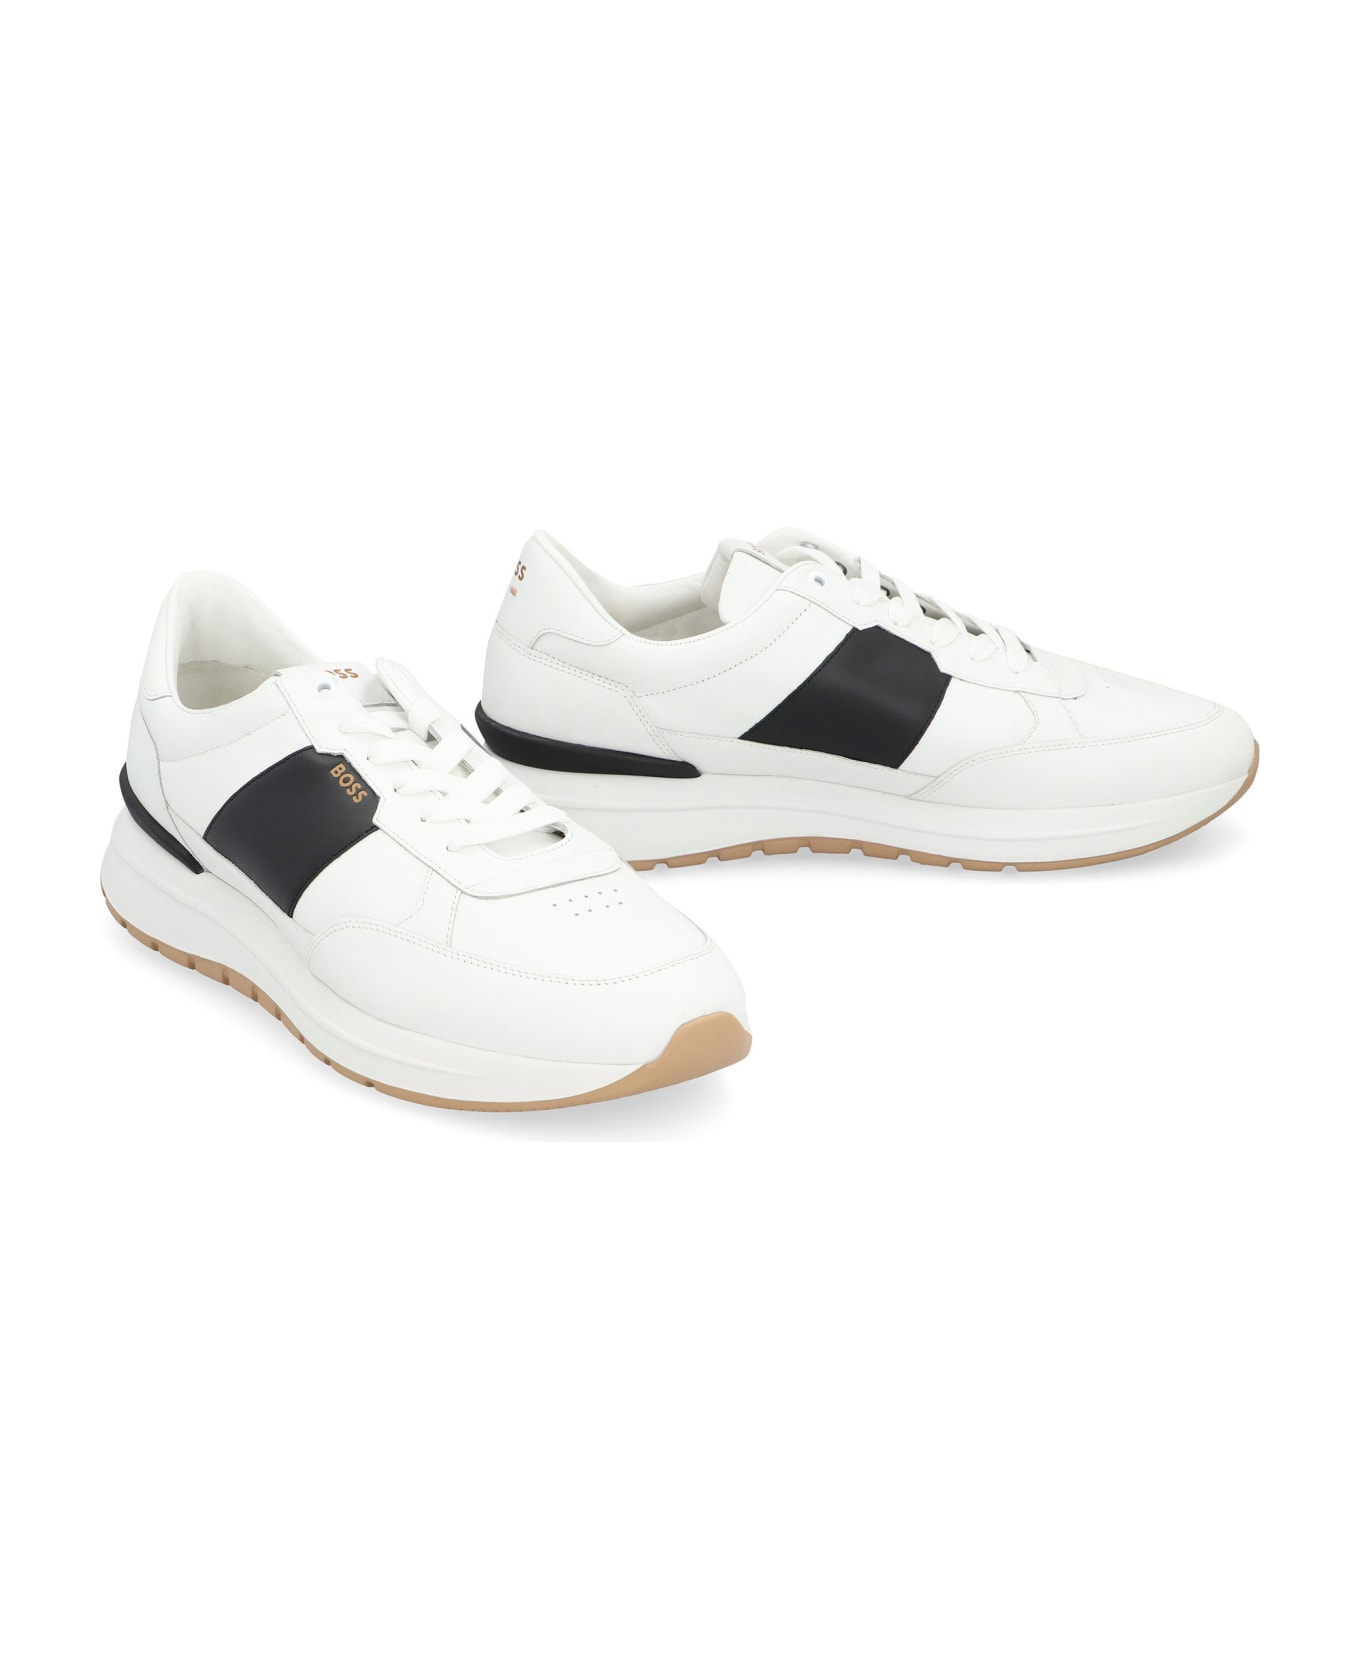 Hugo Boss Jace Leather Low-top Sneakers - White